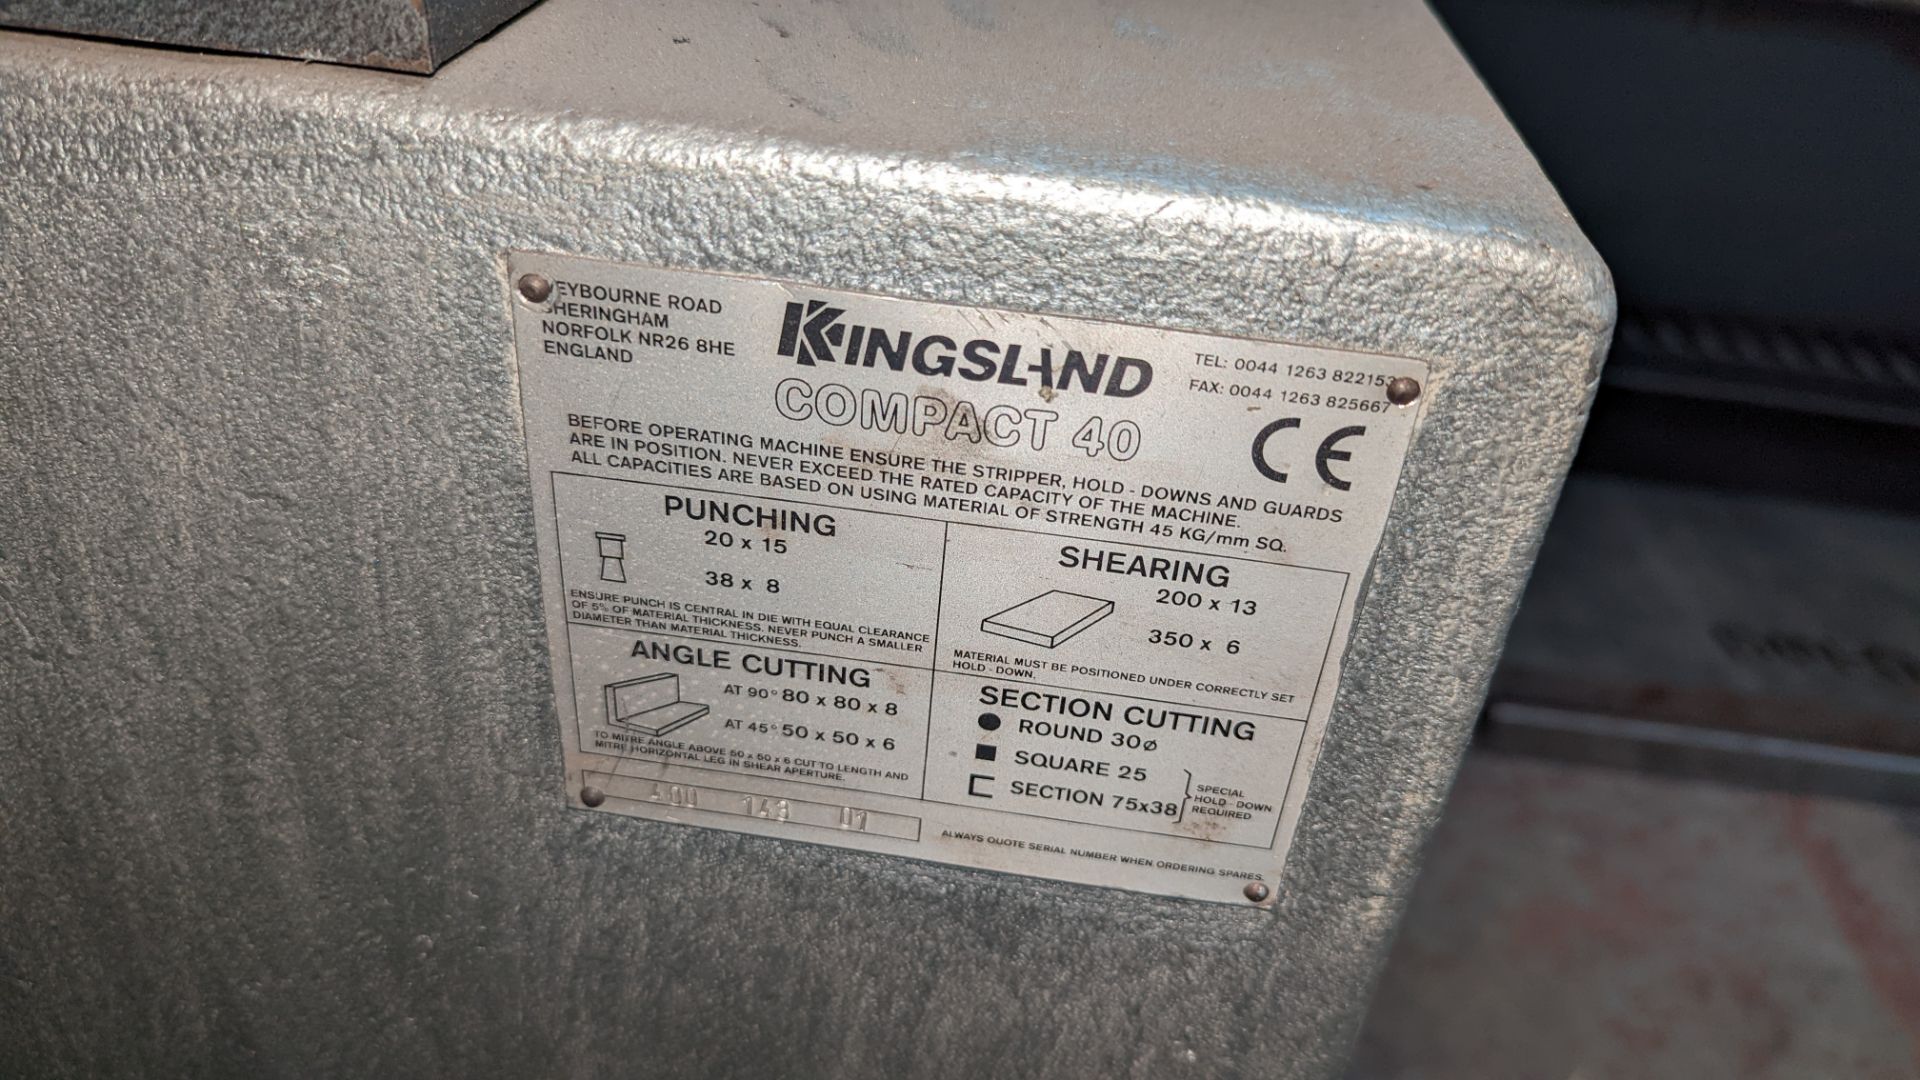 Kingsland Compact 40 steelworker (punching, shearing, angle cutting & section cutting) - Image 14 of 17